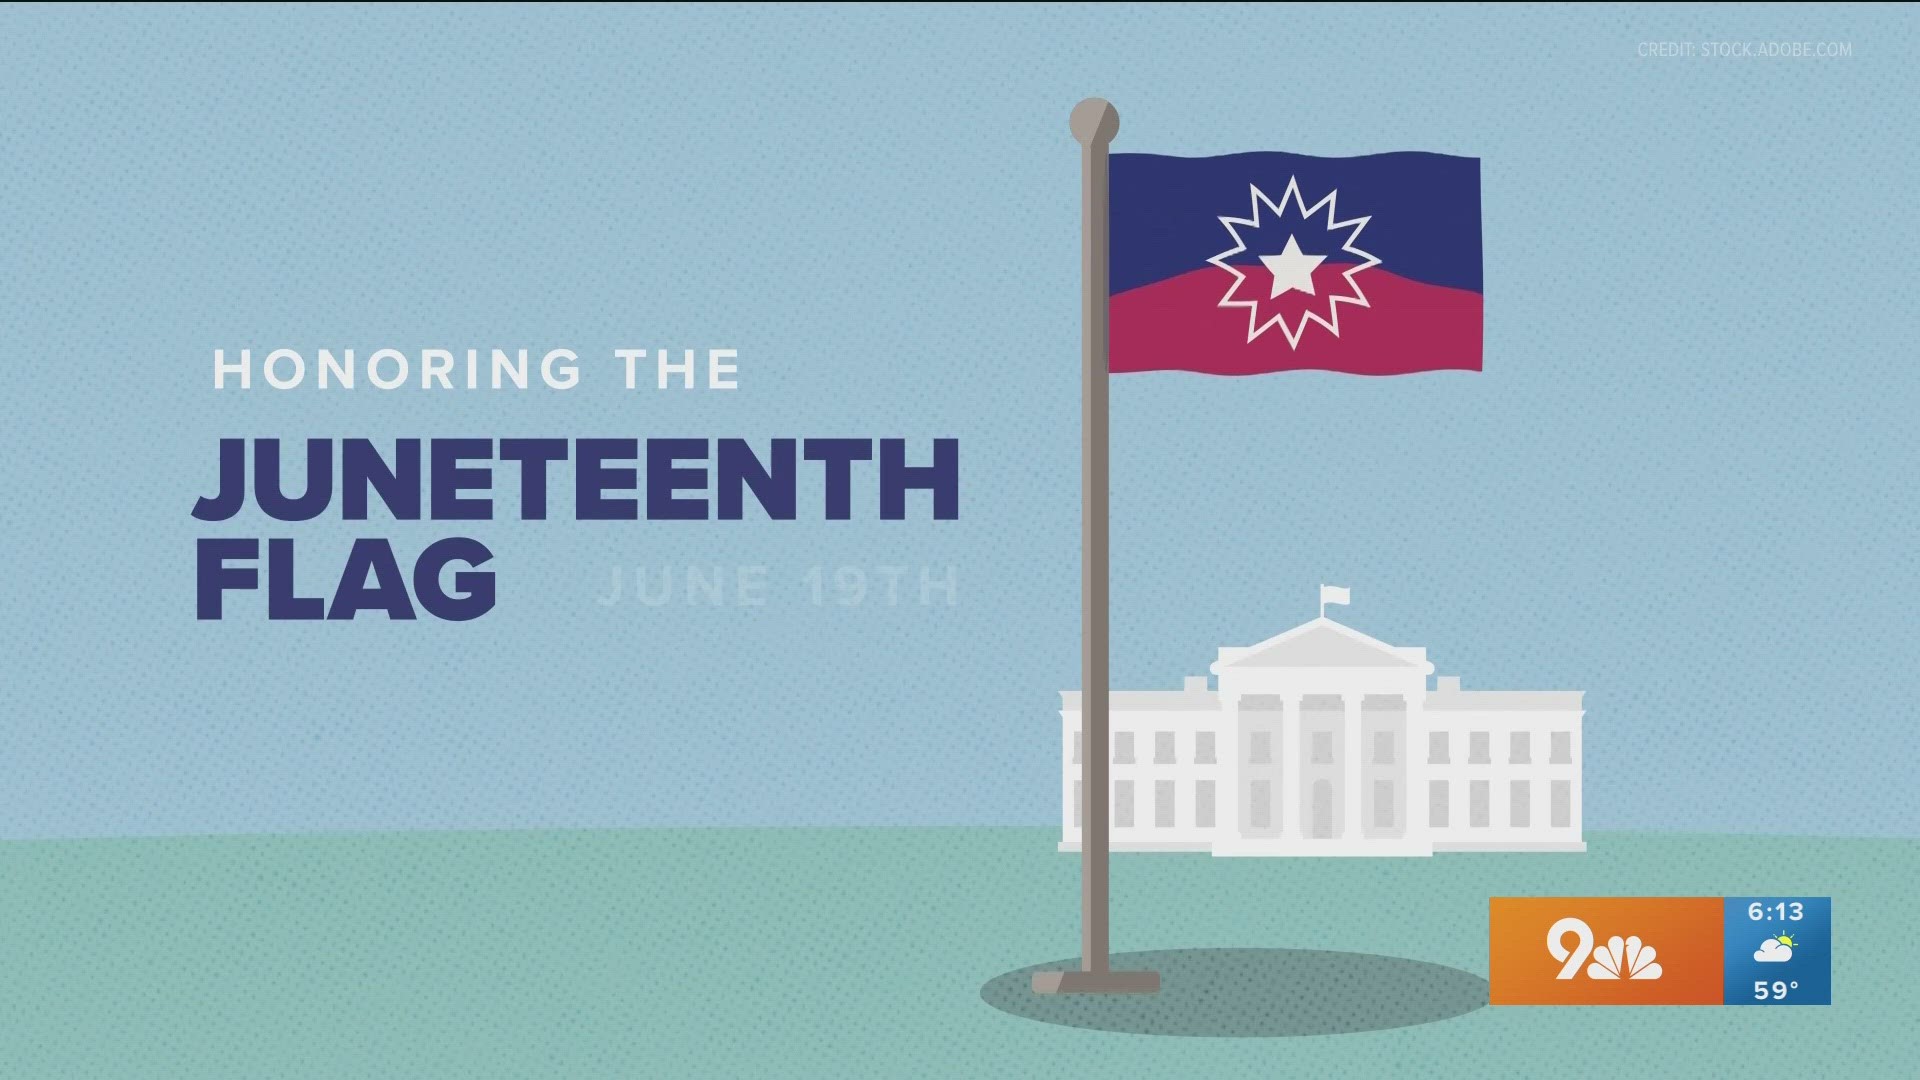 The Juneteenth flag, which commemorates the day that slavery ended in the United States, is packed with symbolism.